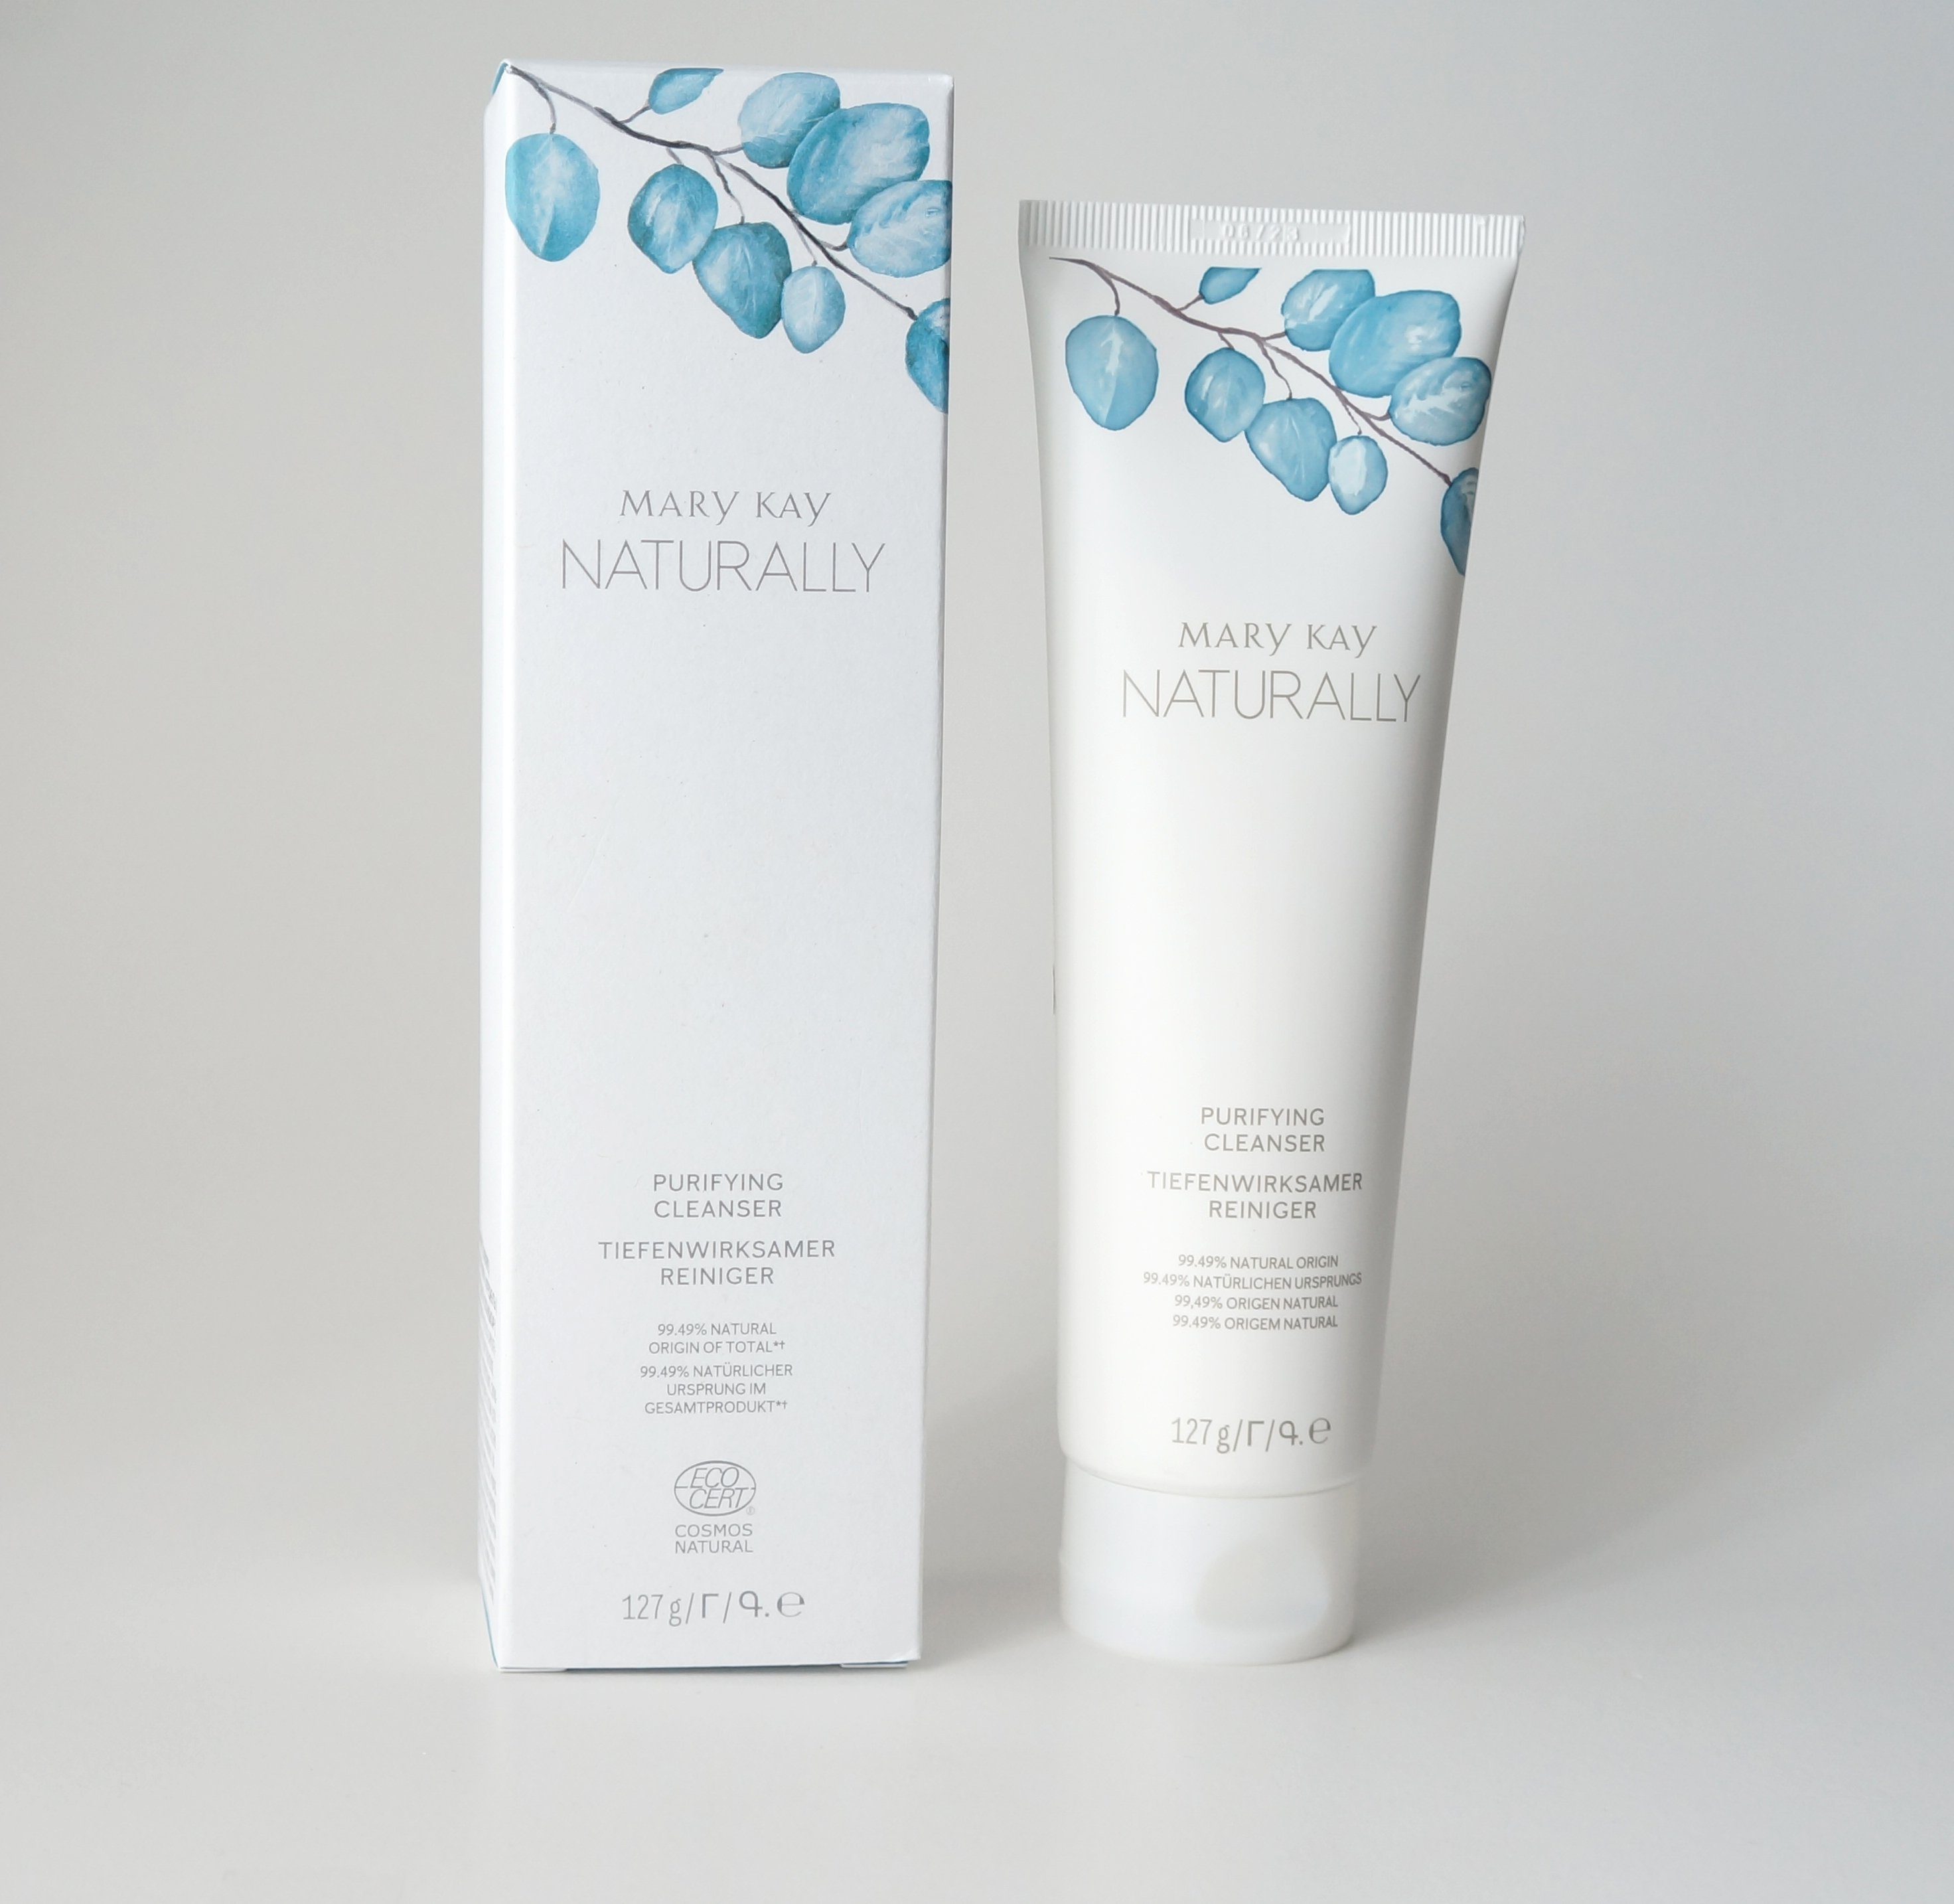 Mary Kay Cleanser Mary 127g Gesichtspflege Naturally Purifying Tiefenwirksamer Kay Reiniger